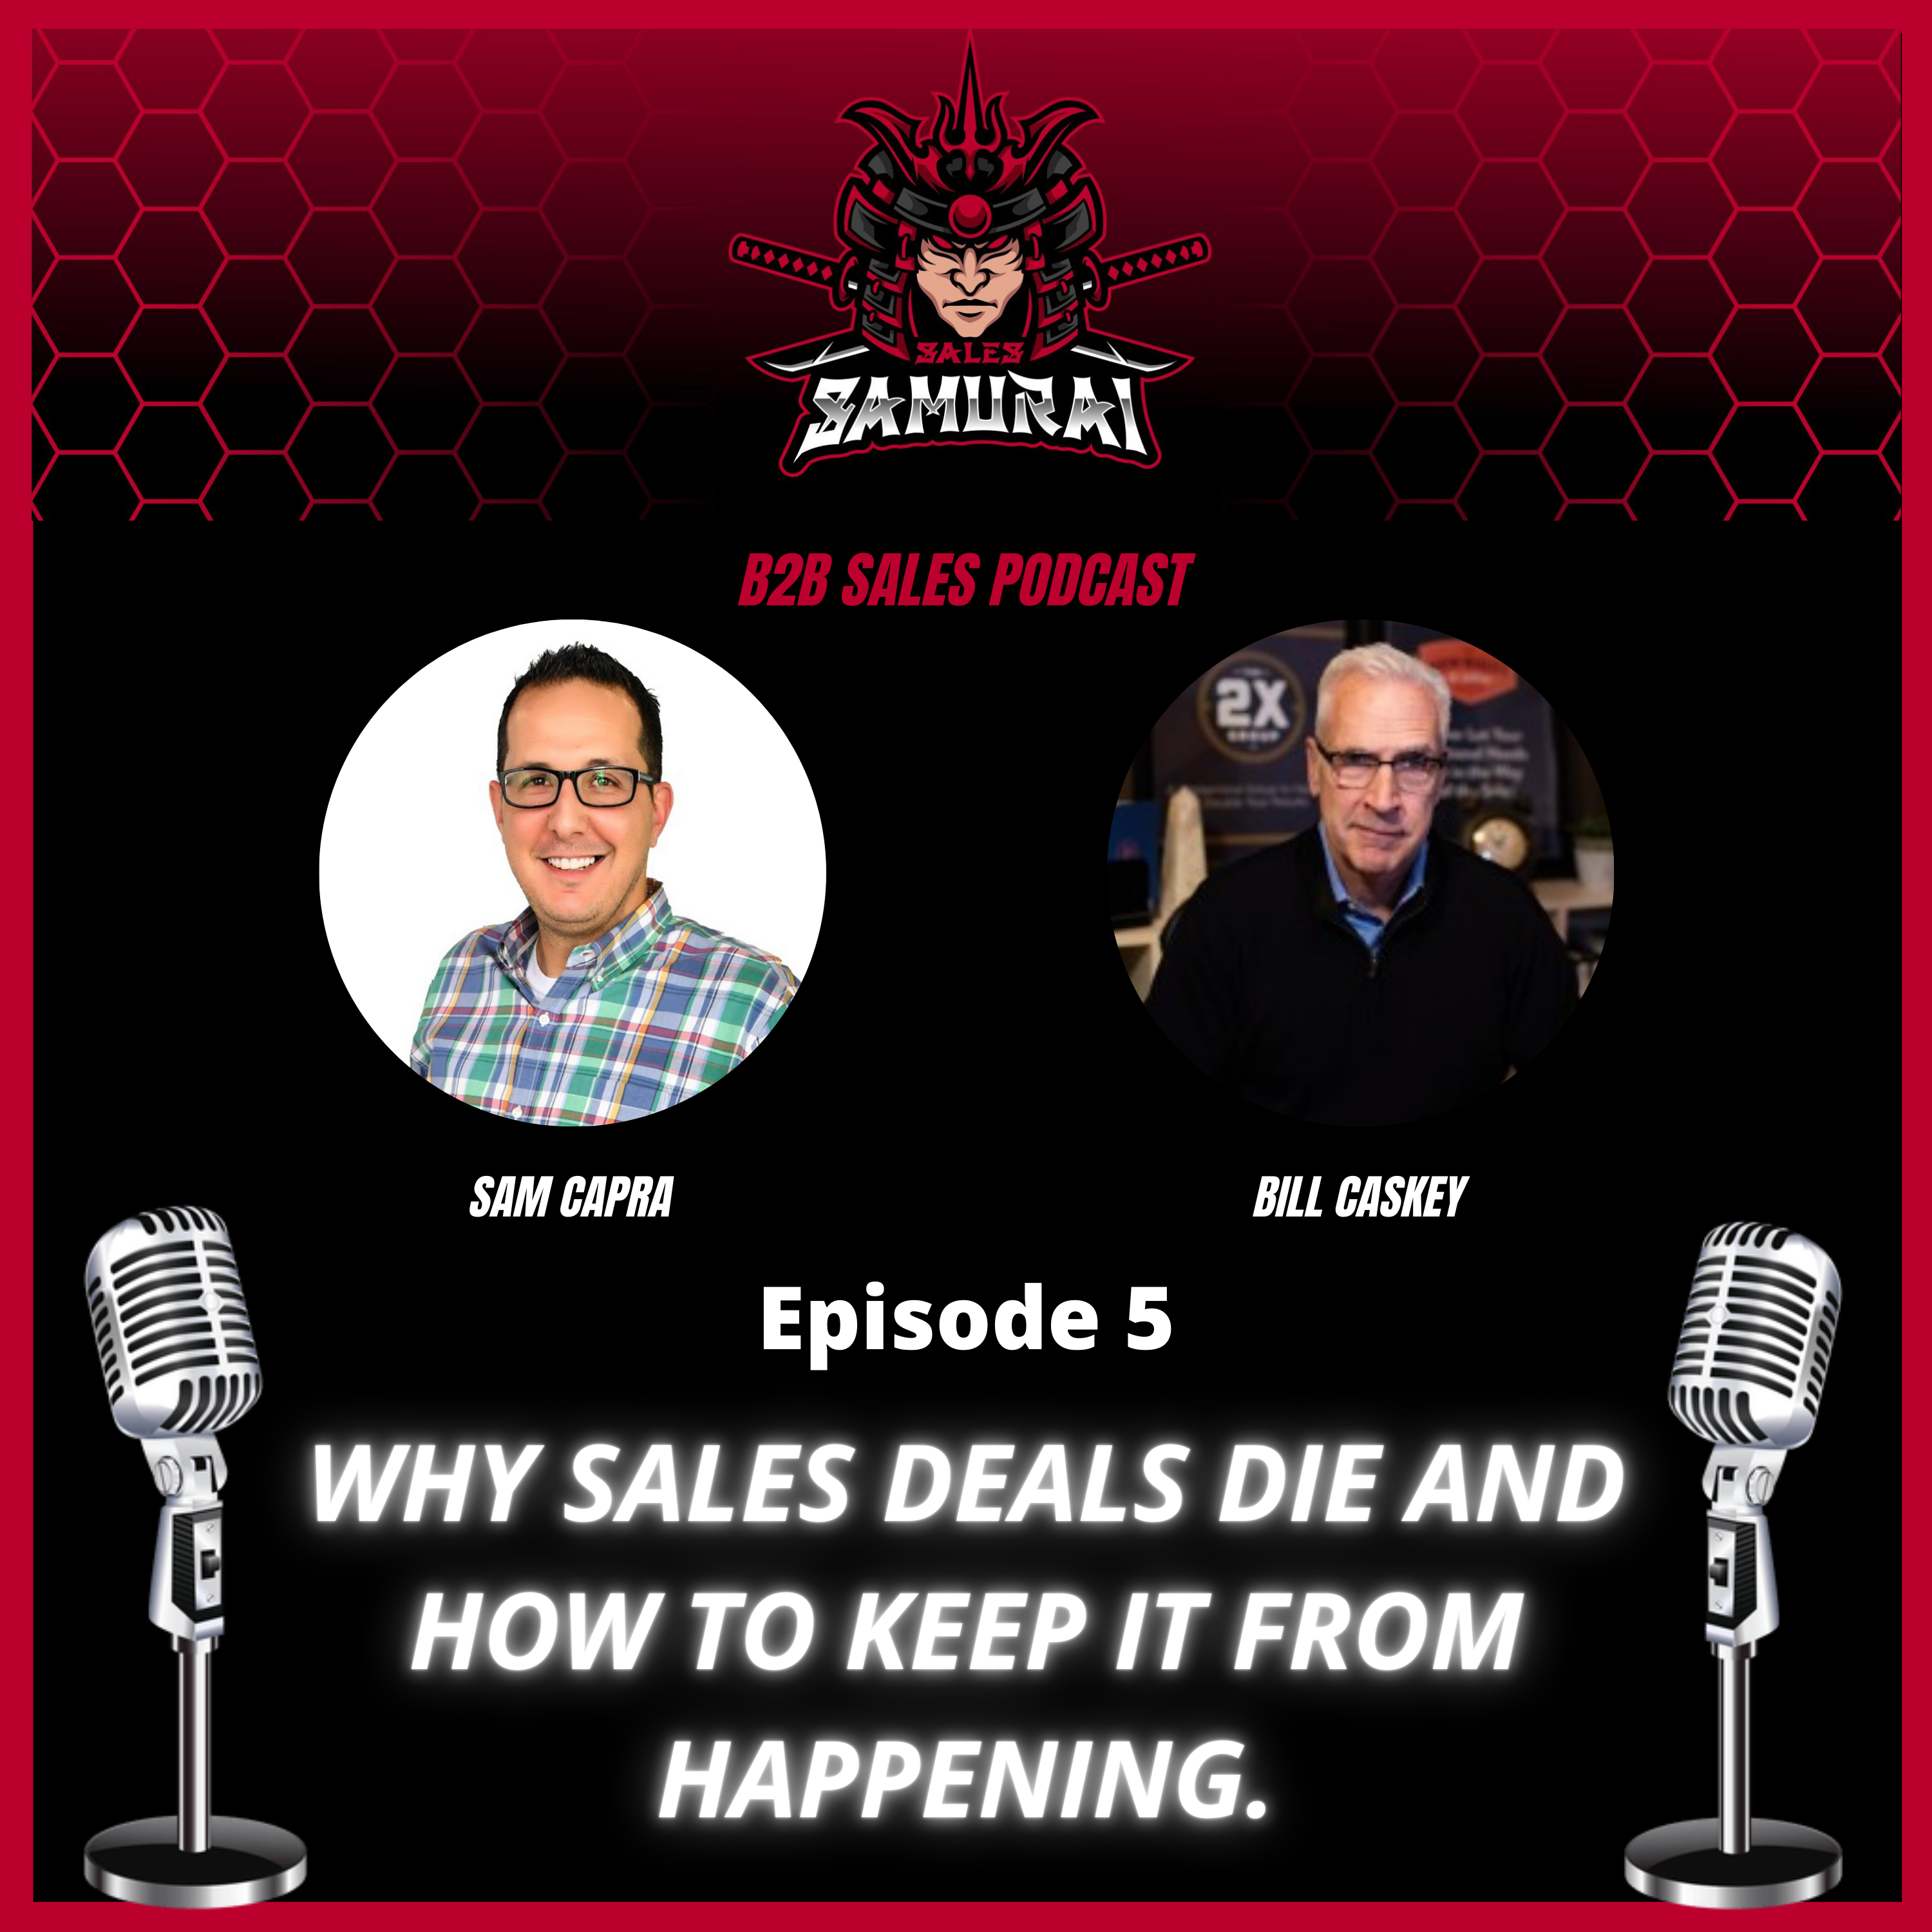 Why Sales Deals Die and How to Keep It From Happening Image